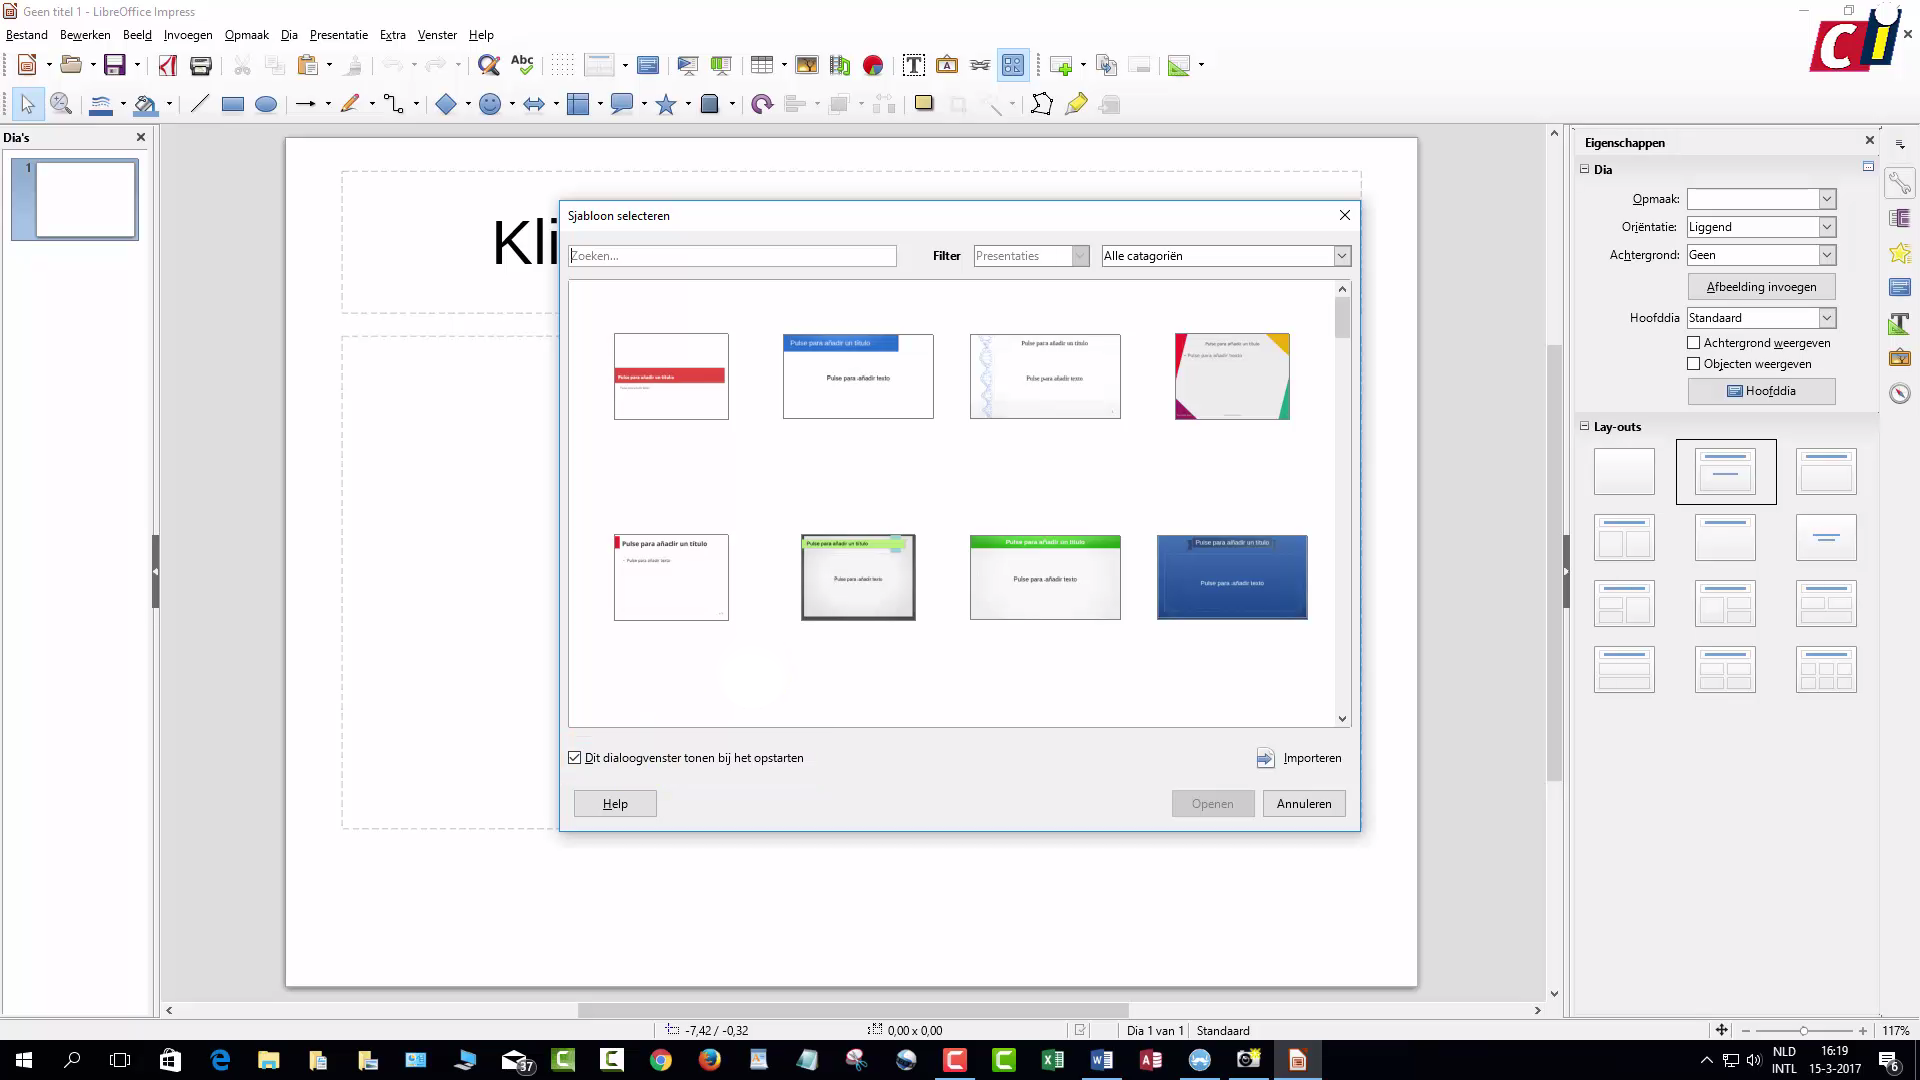 libreoffice impress download for windows